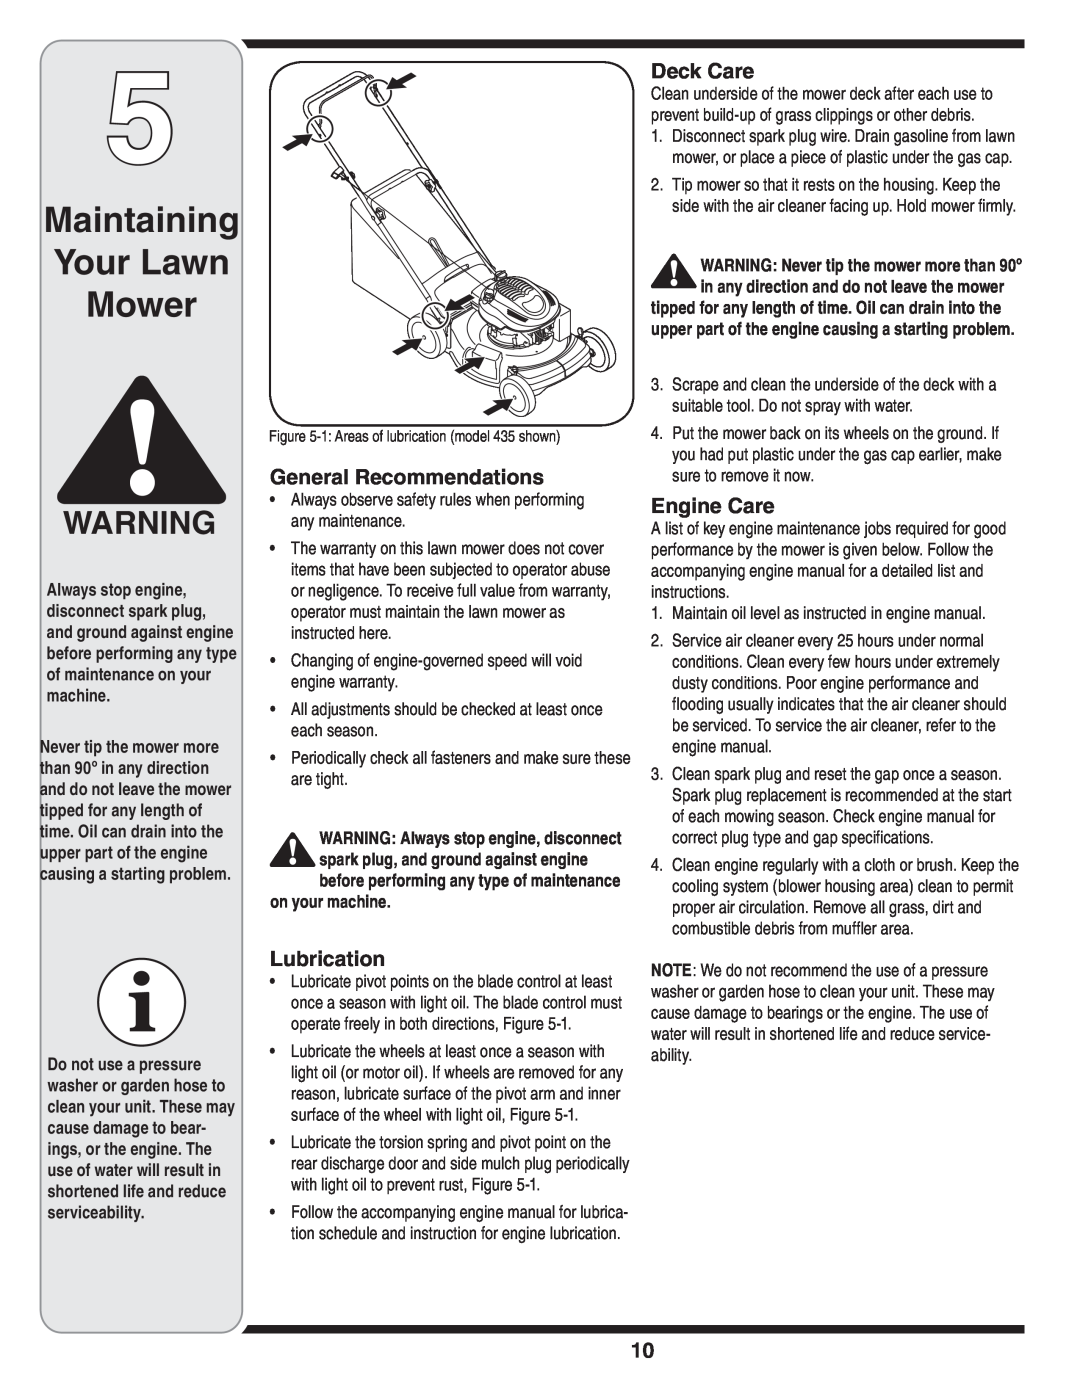 Yard-Man 430 Maintaining Your Lawn Mower, General Recommendations, Lubrication, Deck Care, Engine Care, on your machine 